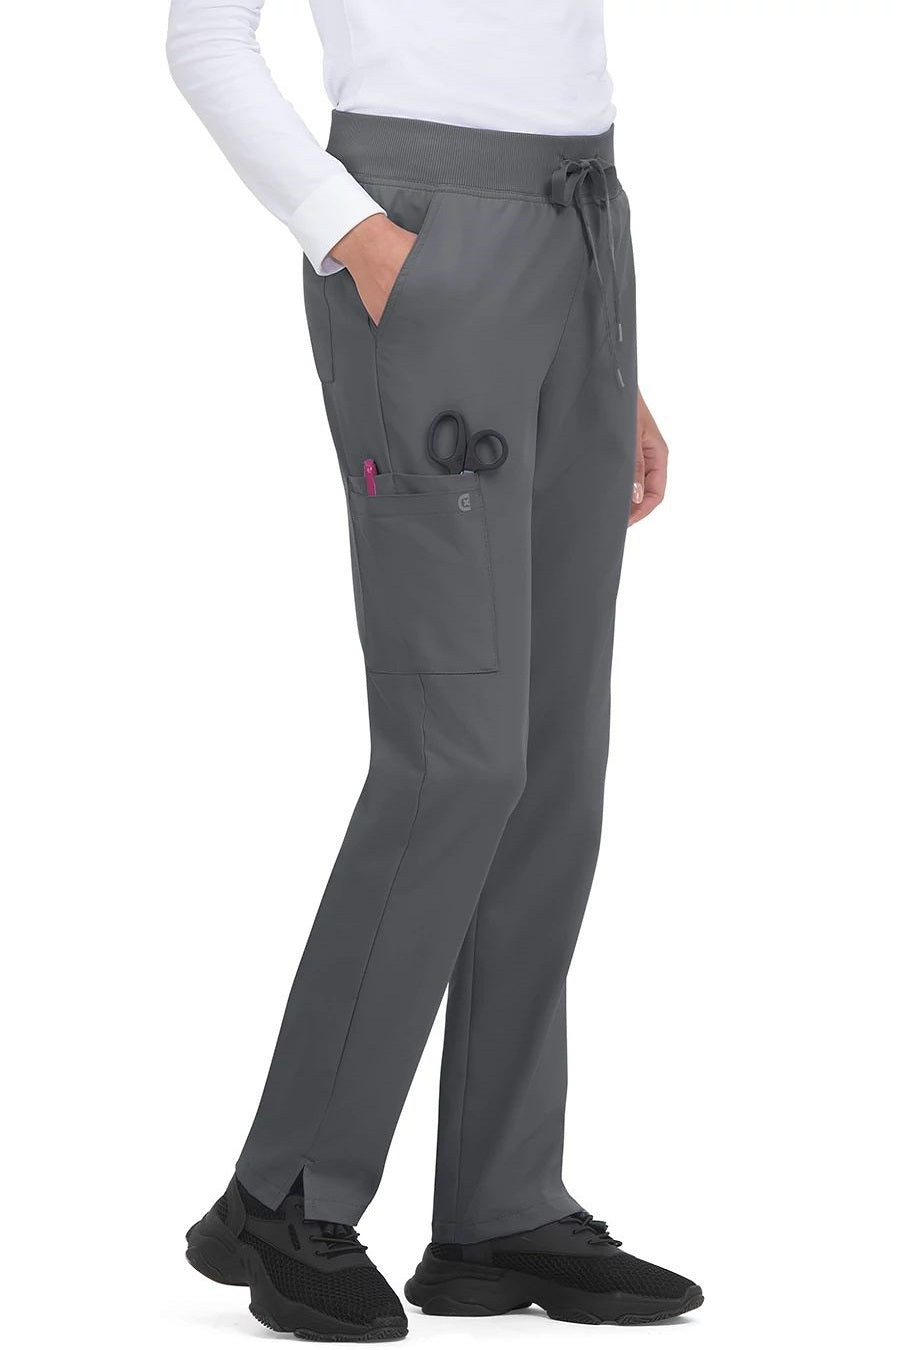 koi Scrub Pants Cureology Atria in Tall Pewter at Parker's Clothing and Shoes.